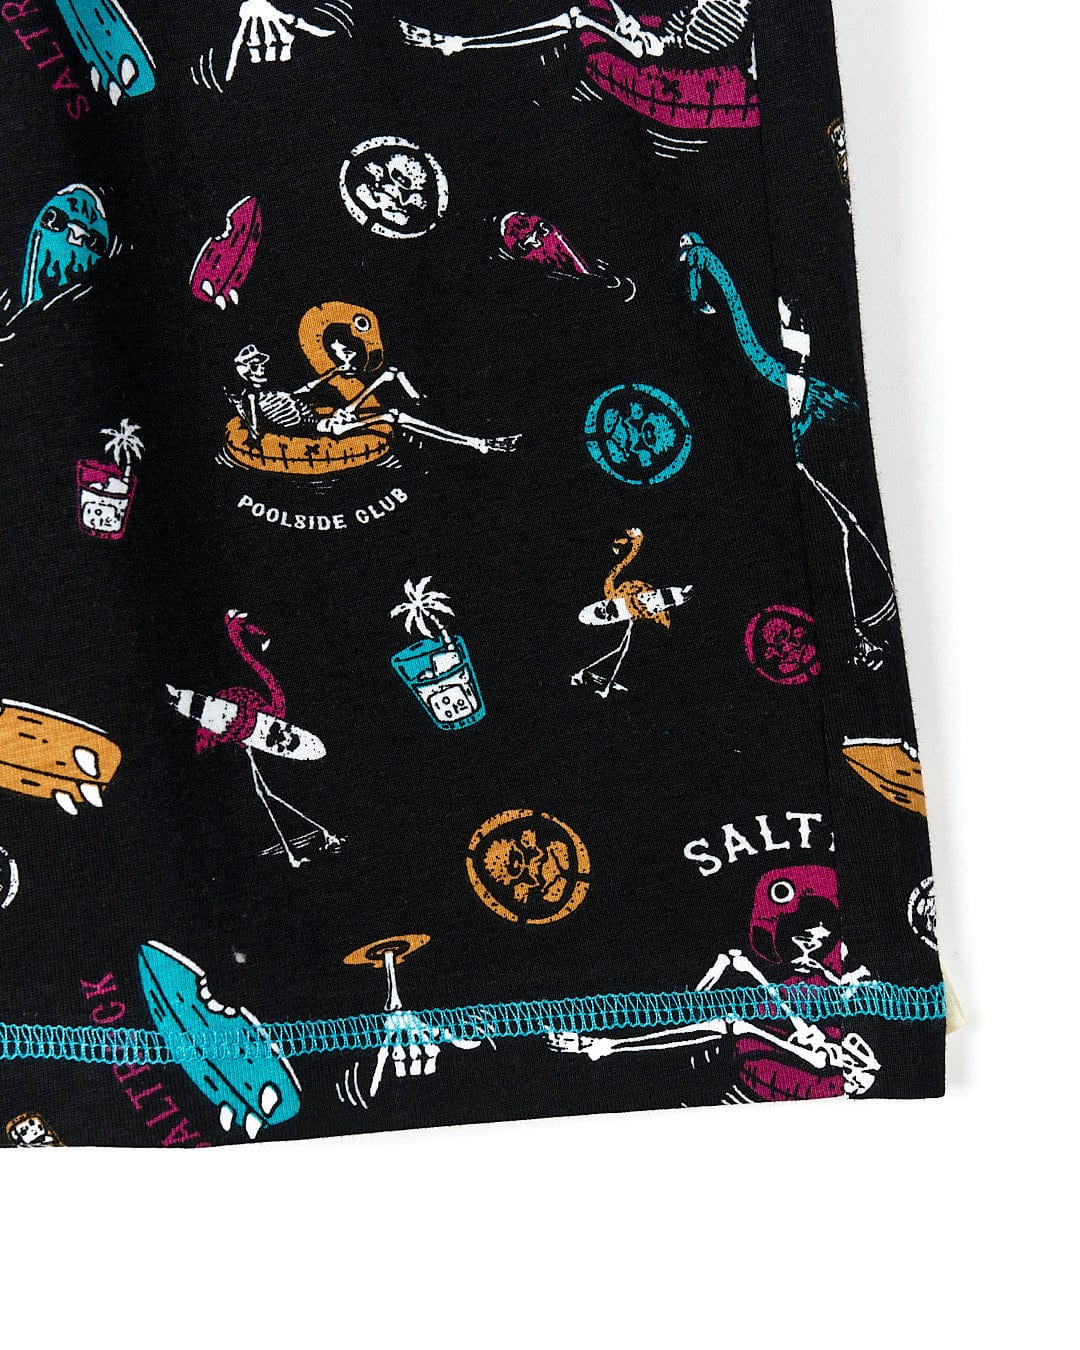 A Saltrock Poolside Mash - Kids All Over Sweat Short - Black with colorful designs on it.